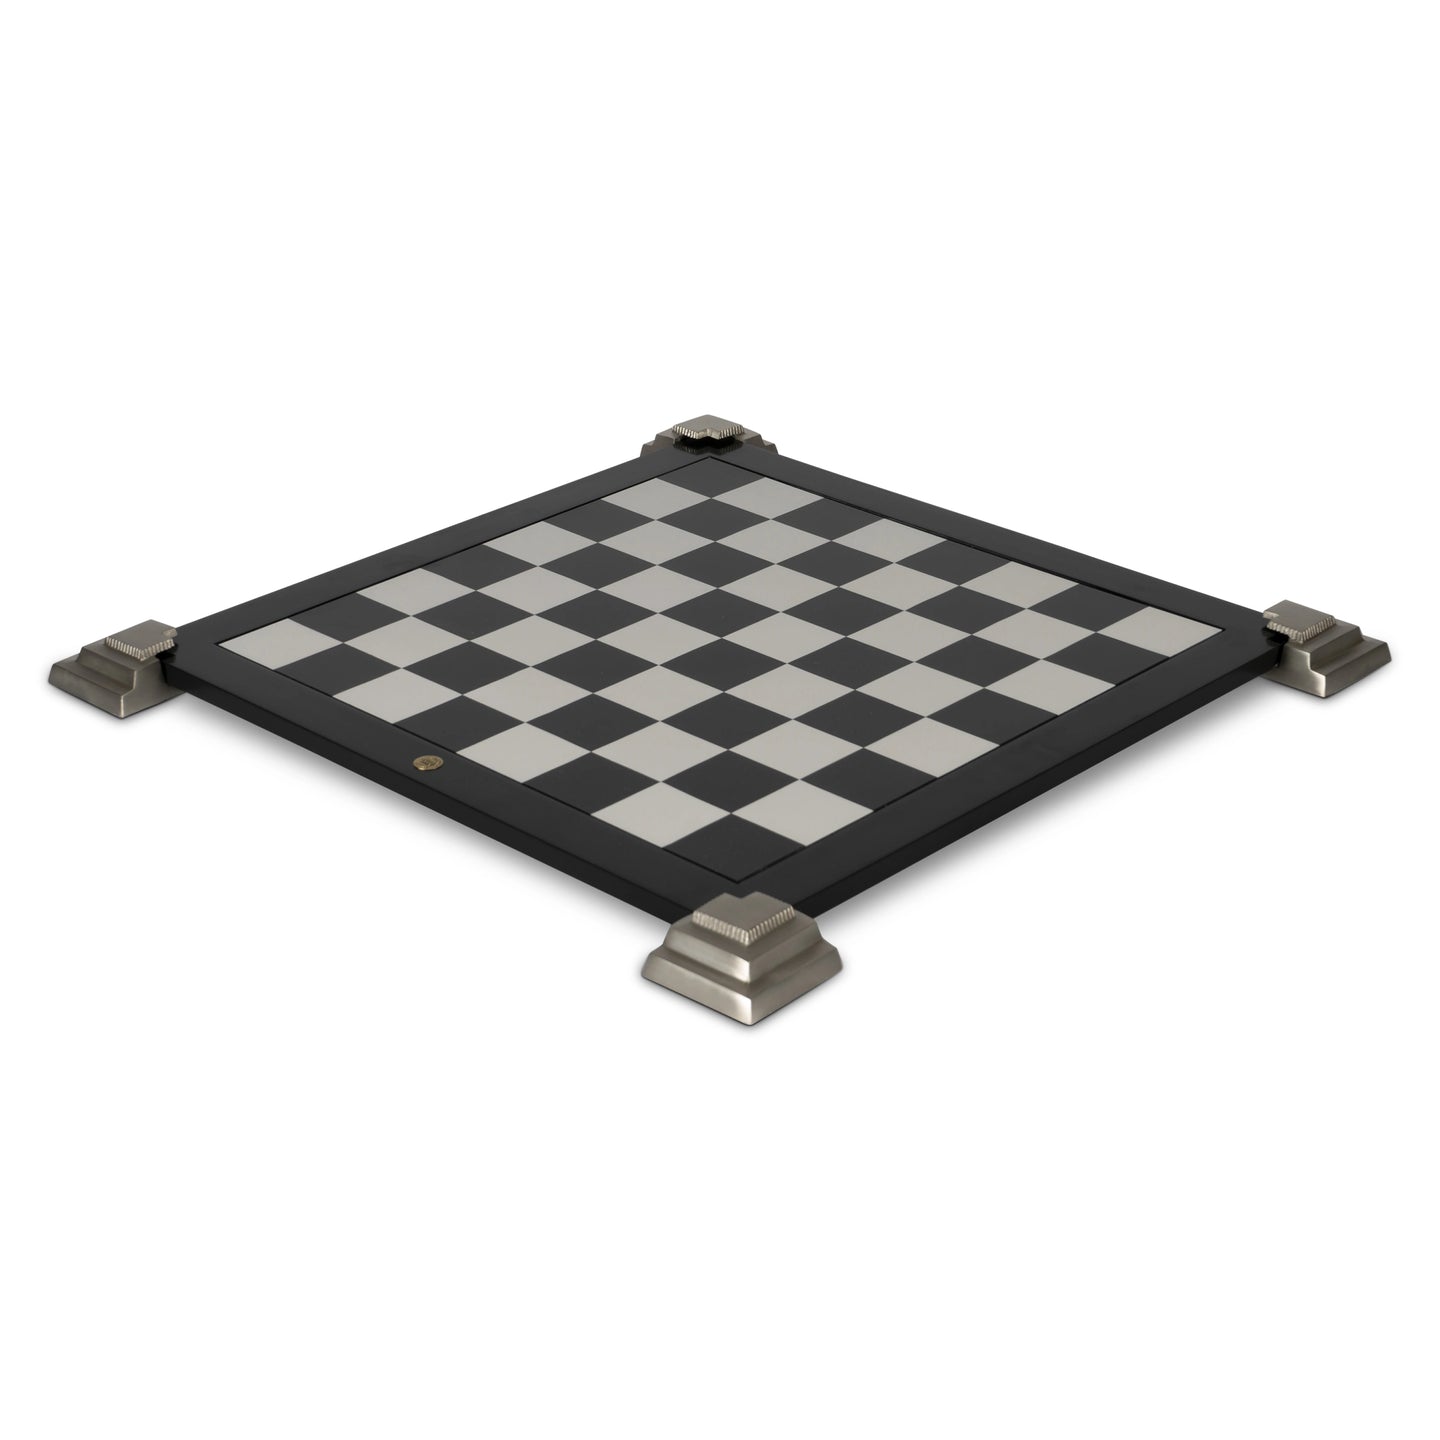 Authentic Models Silver, Black & White 2-Sided Game Board - GR036